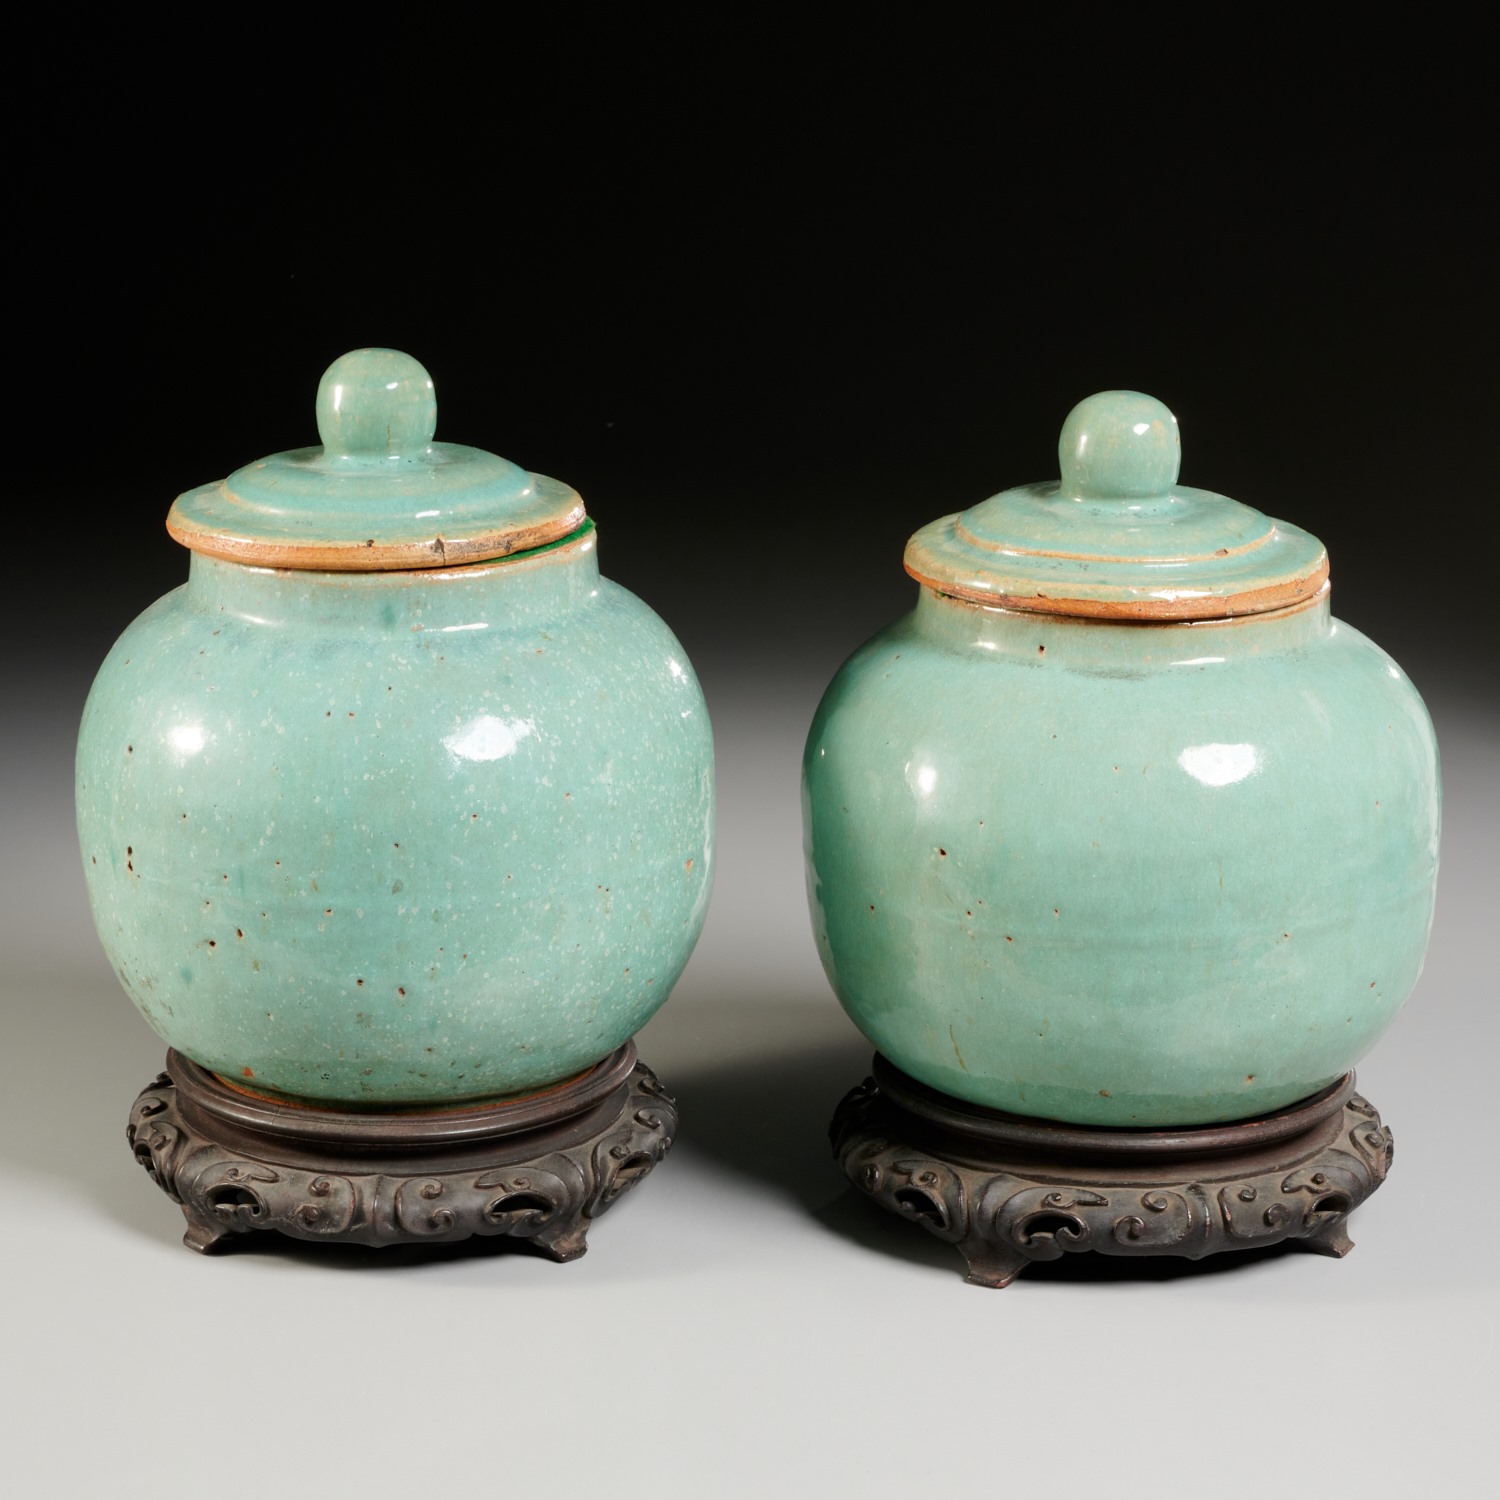 PAIR CHINESE CELADON JARS AND COVERS 361d0f